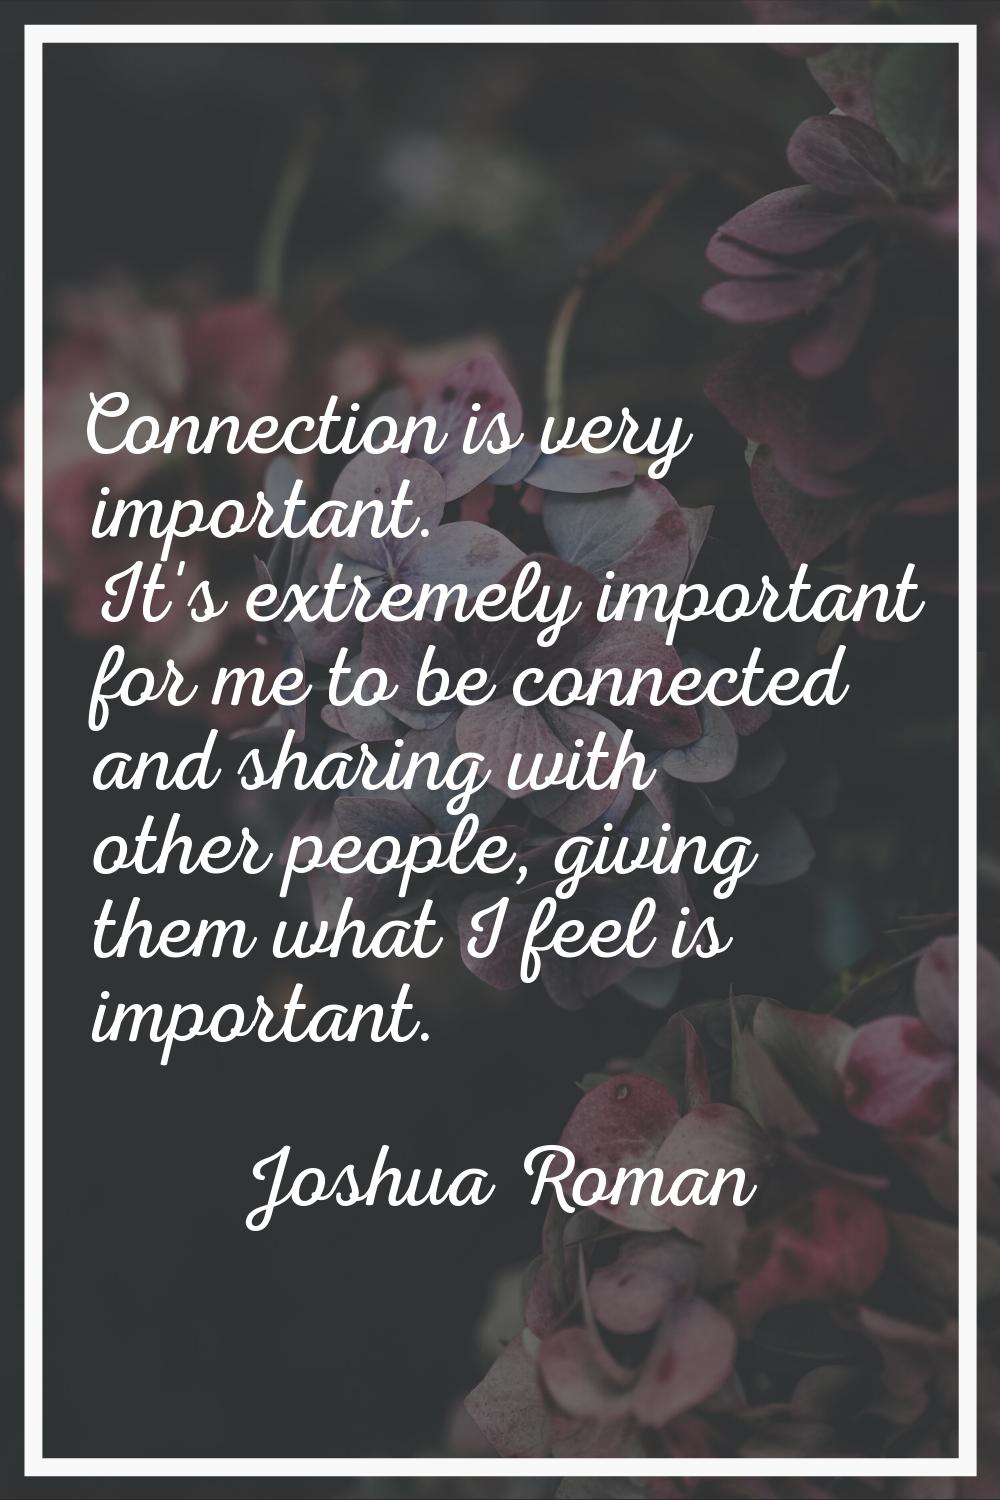 Connection is very important. It's extremely important for me to be connected and sharing with othe